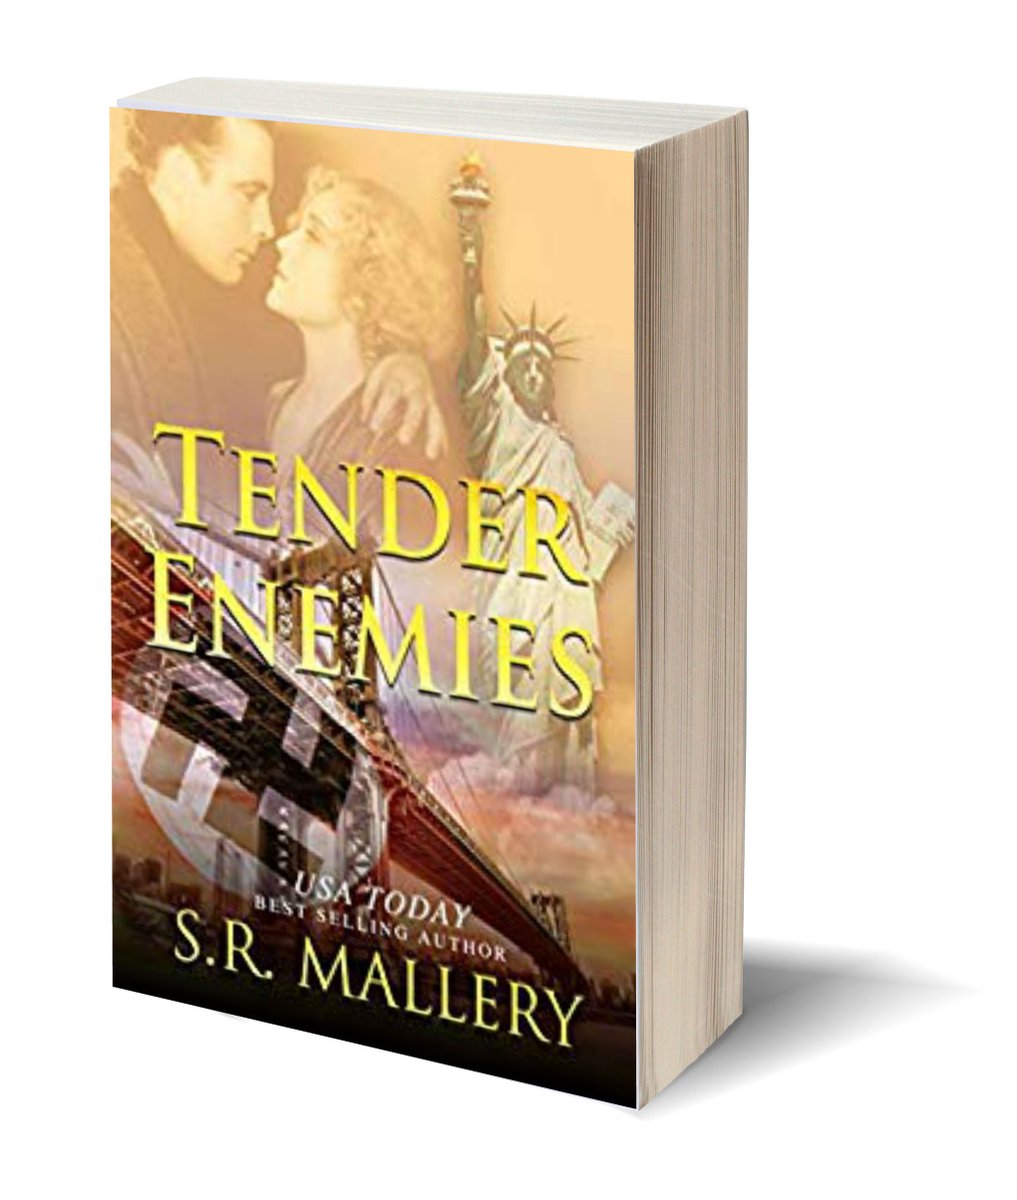 1941 in New York City when Nazi spies are everywhere! TENDER ENEMIES amzn.to/2EUYLNM wp.me/P5rIsN-3Ip @SarahMallery1 #IARTG #ASMSG #mustreads Pizzazz Promotions wp.me/P5rIsN-Ft 1